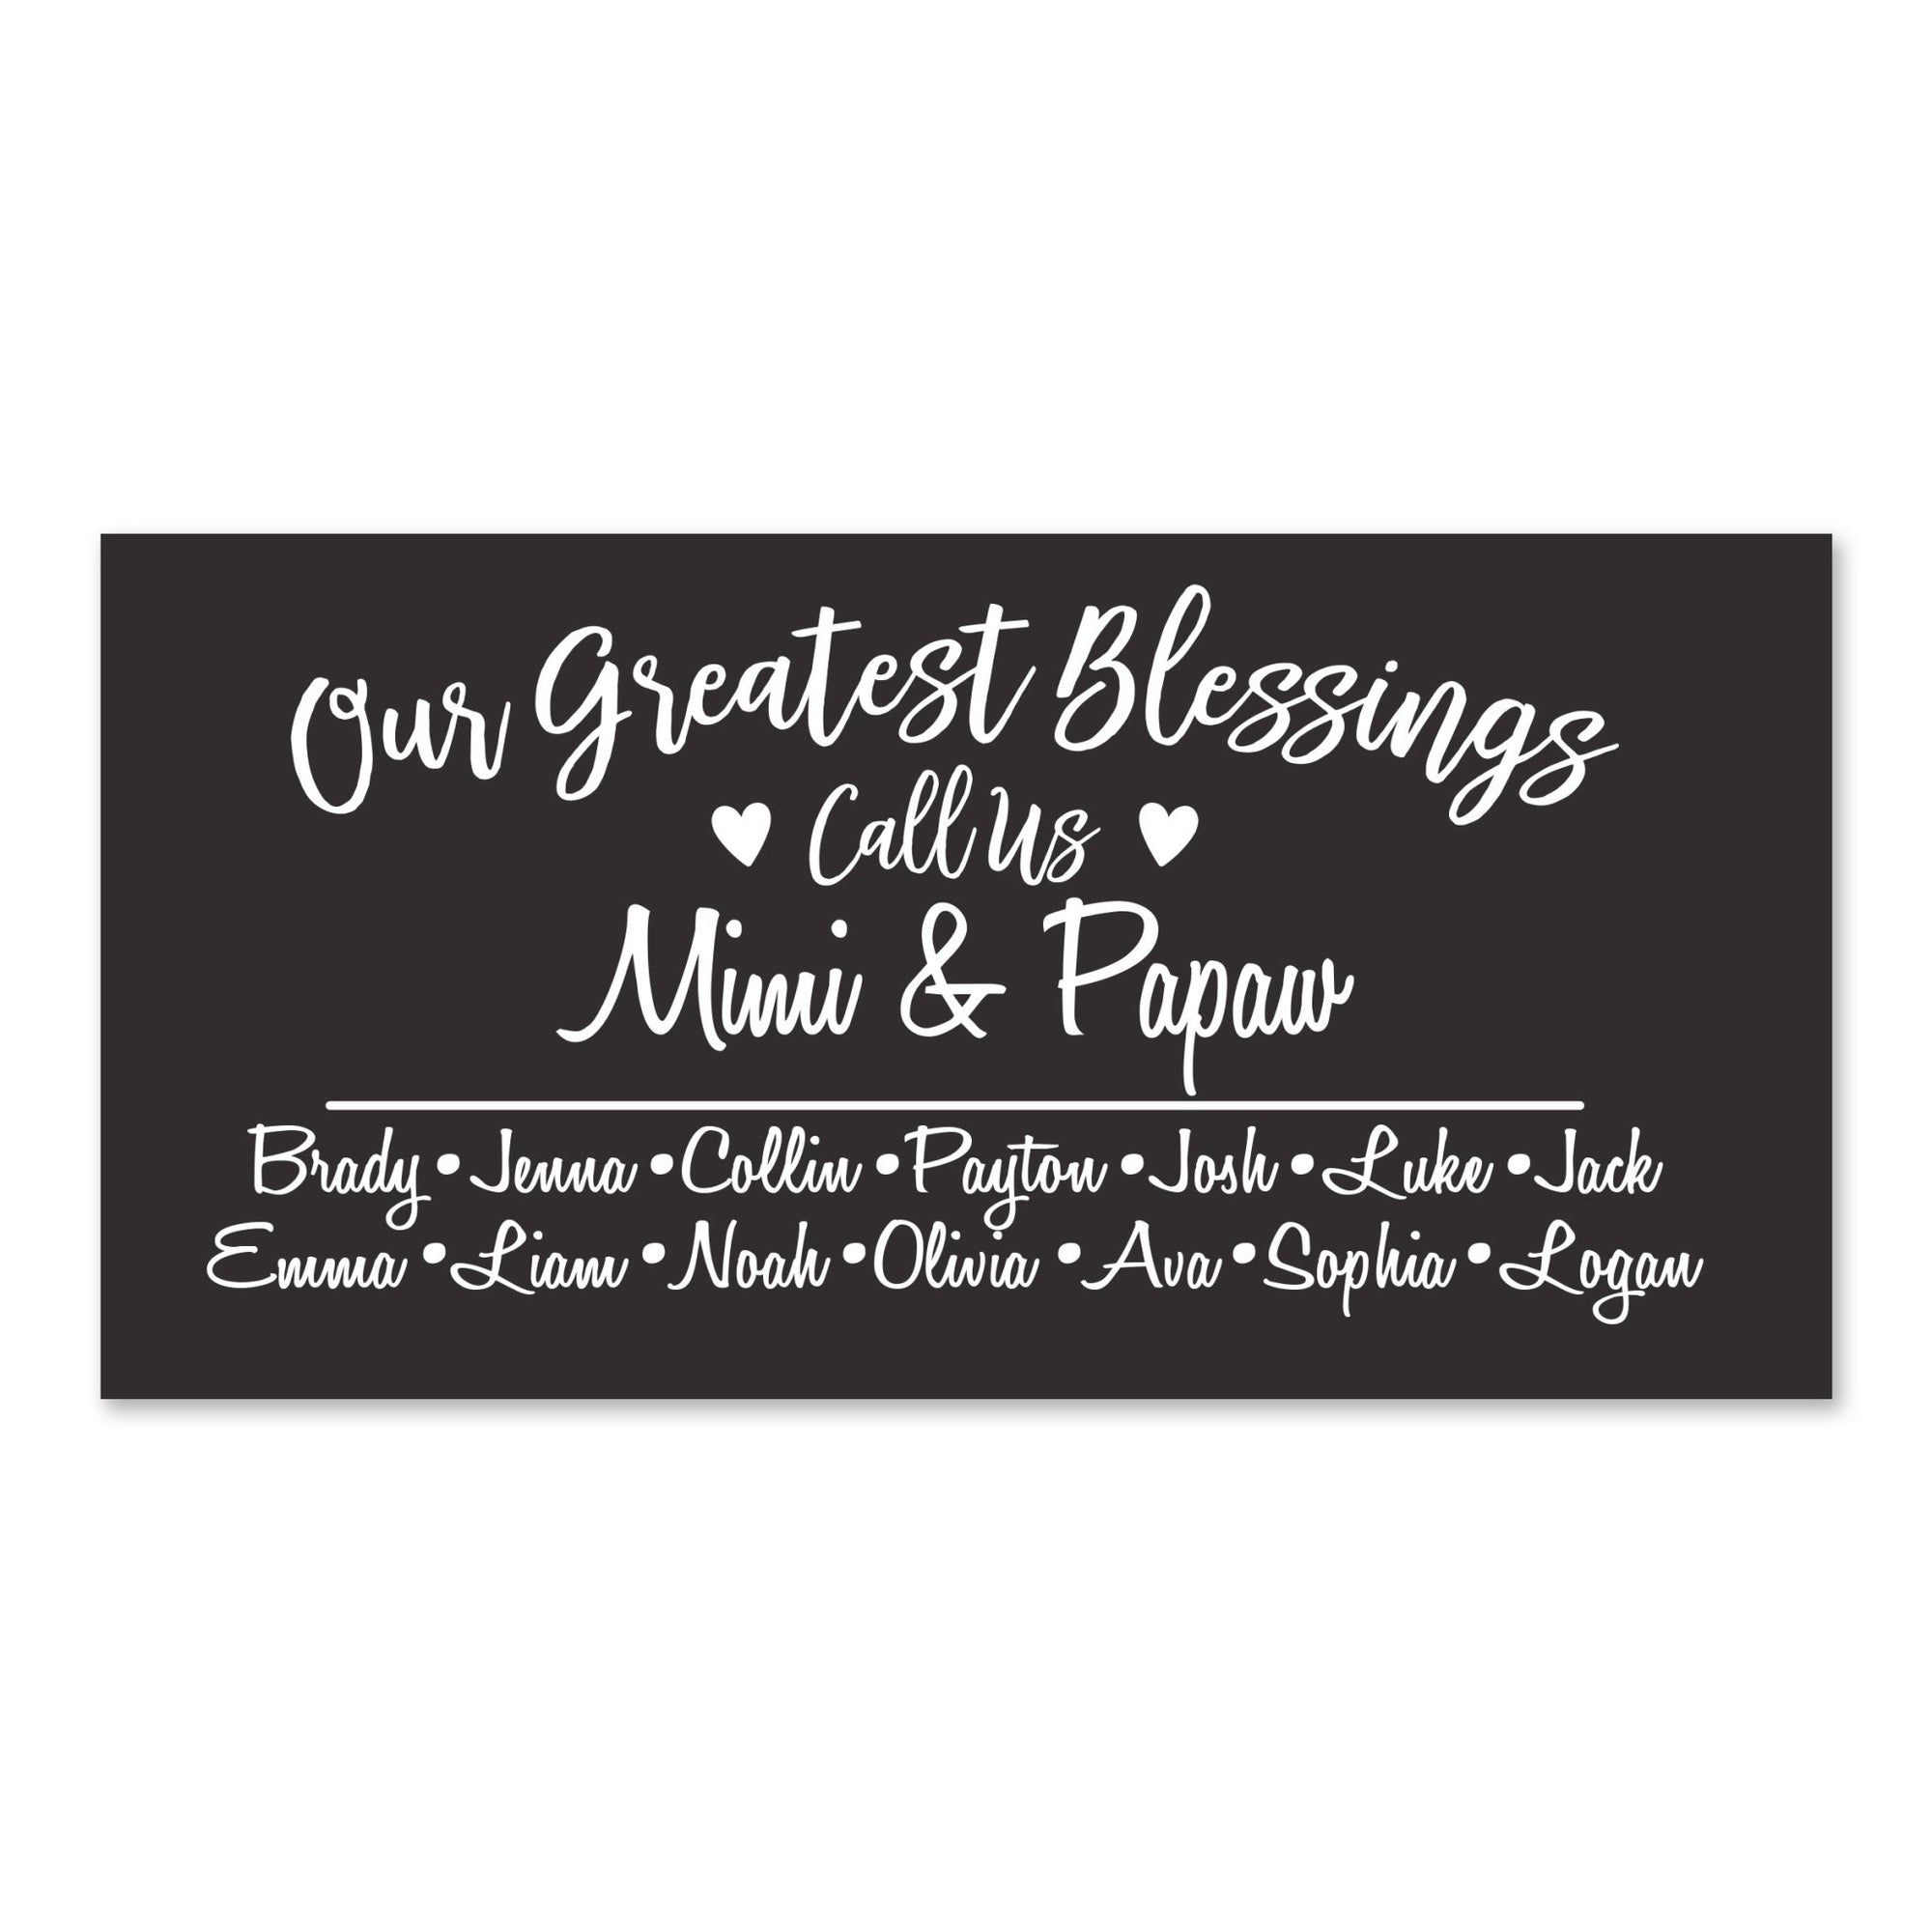 Personalized Grandparents Plaque Greatest Blessings - Mimi & Papaw - LifeSong Milestones